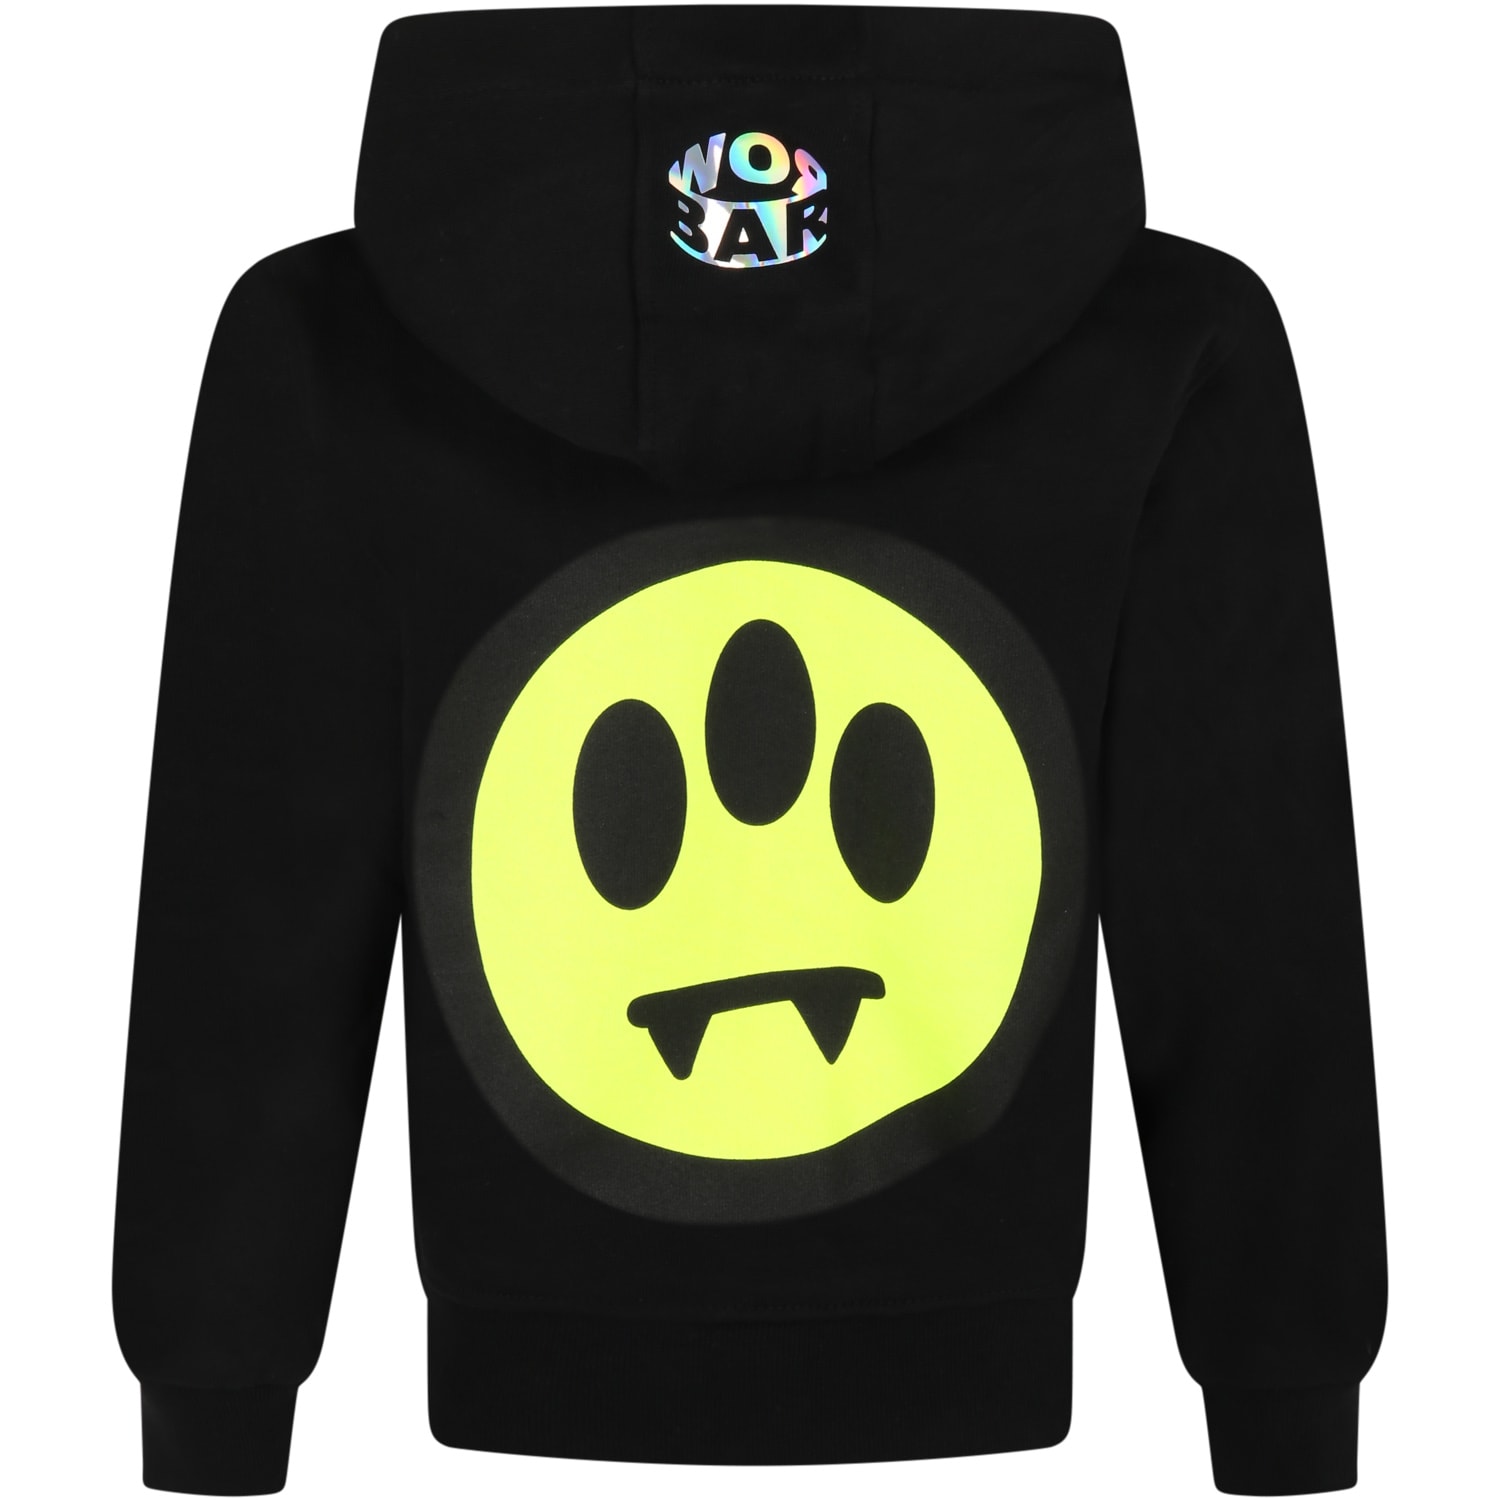 Barrow Black Sweatshirt For Kids With Logo And Smiley Face